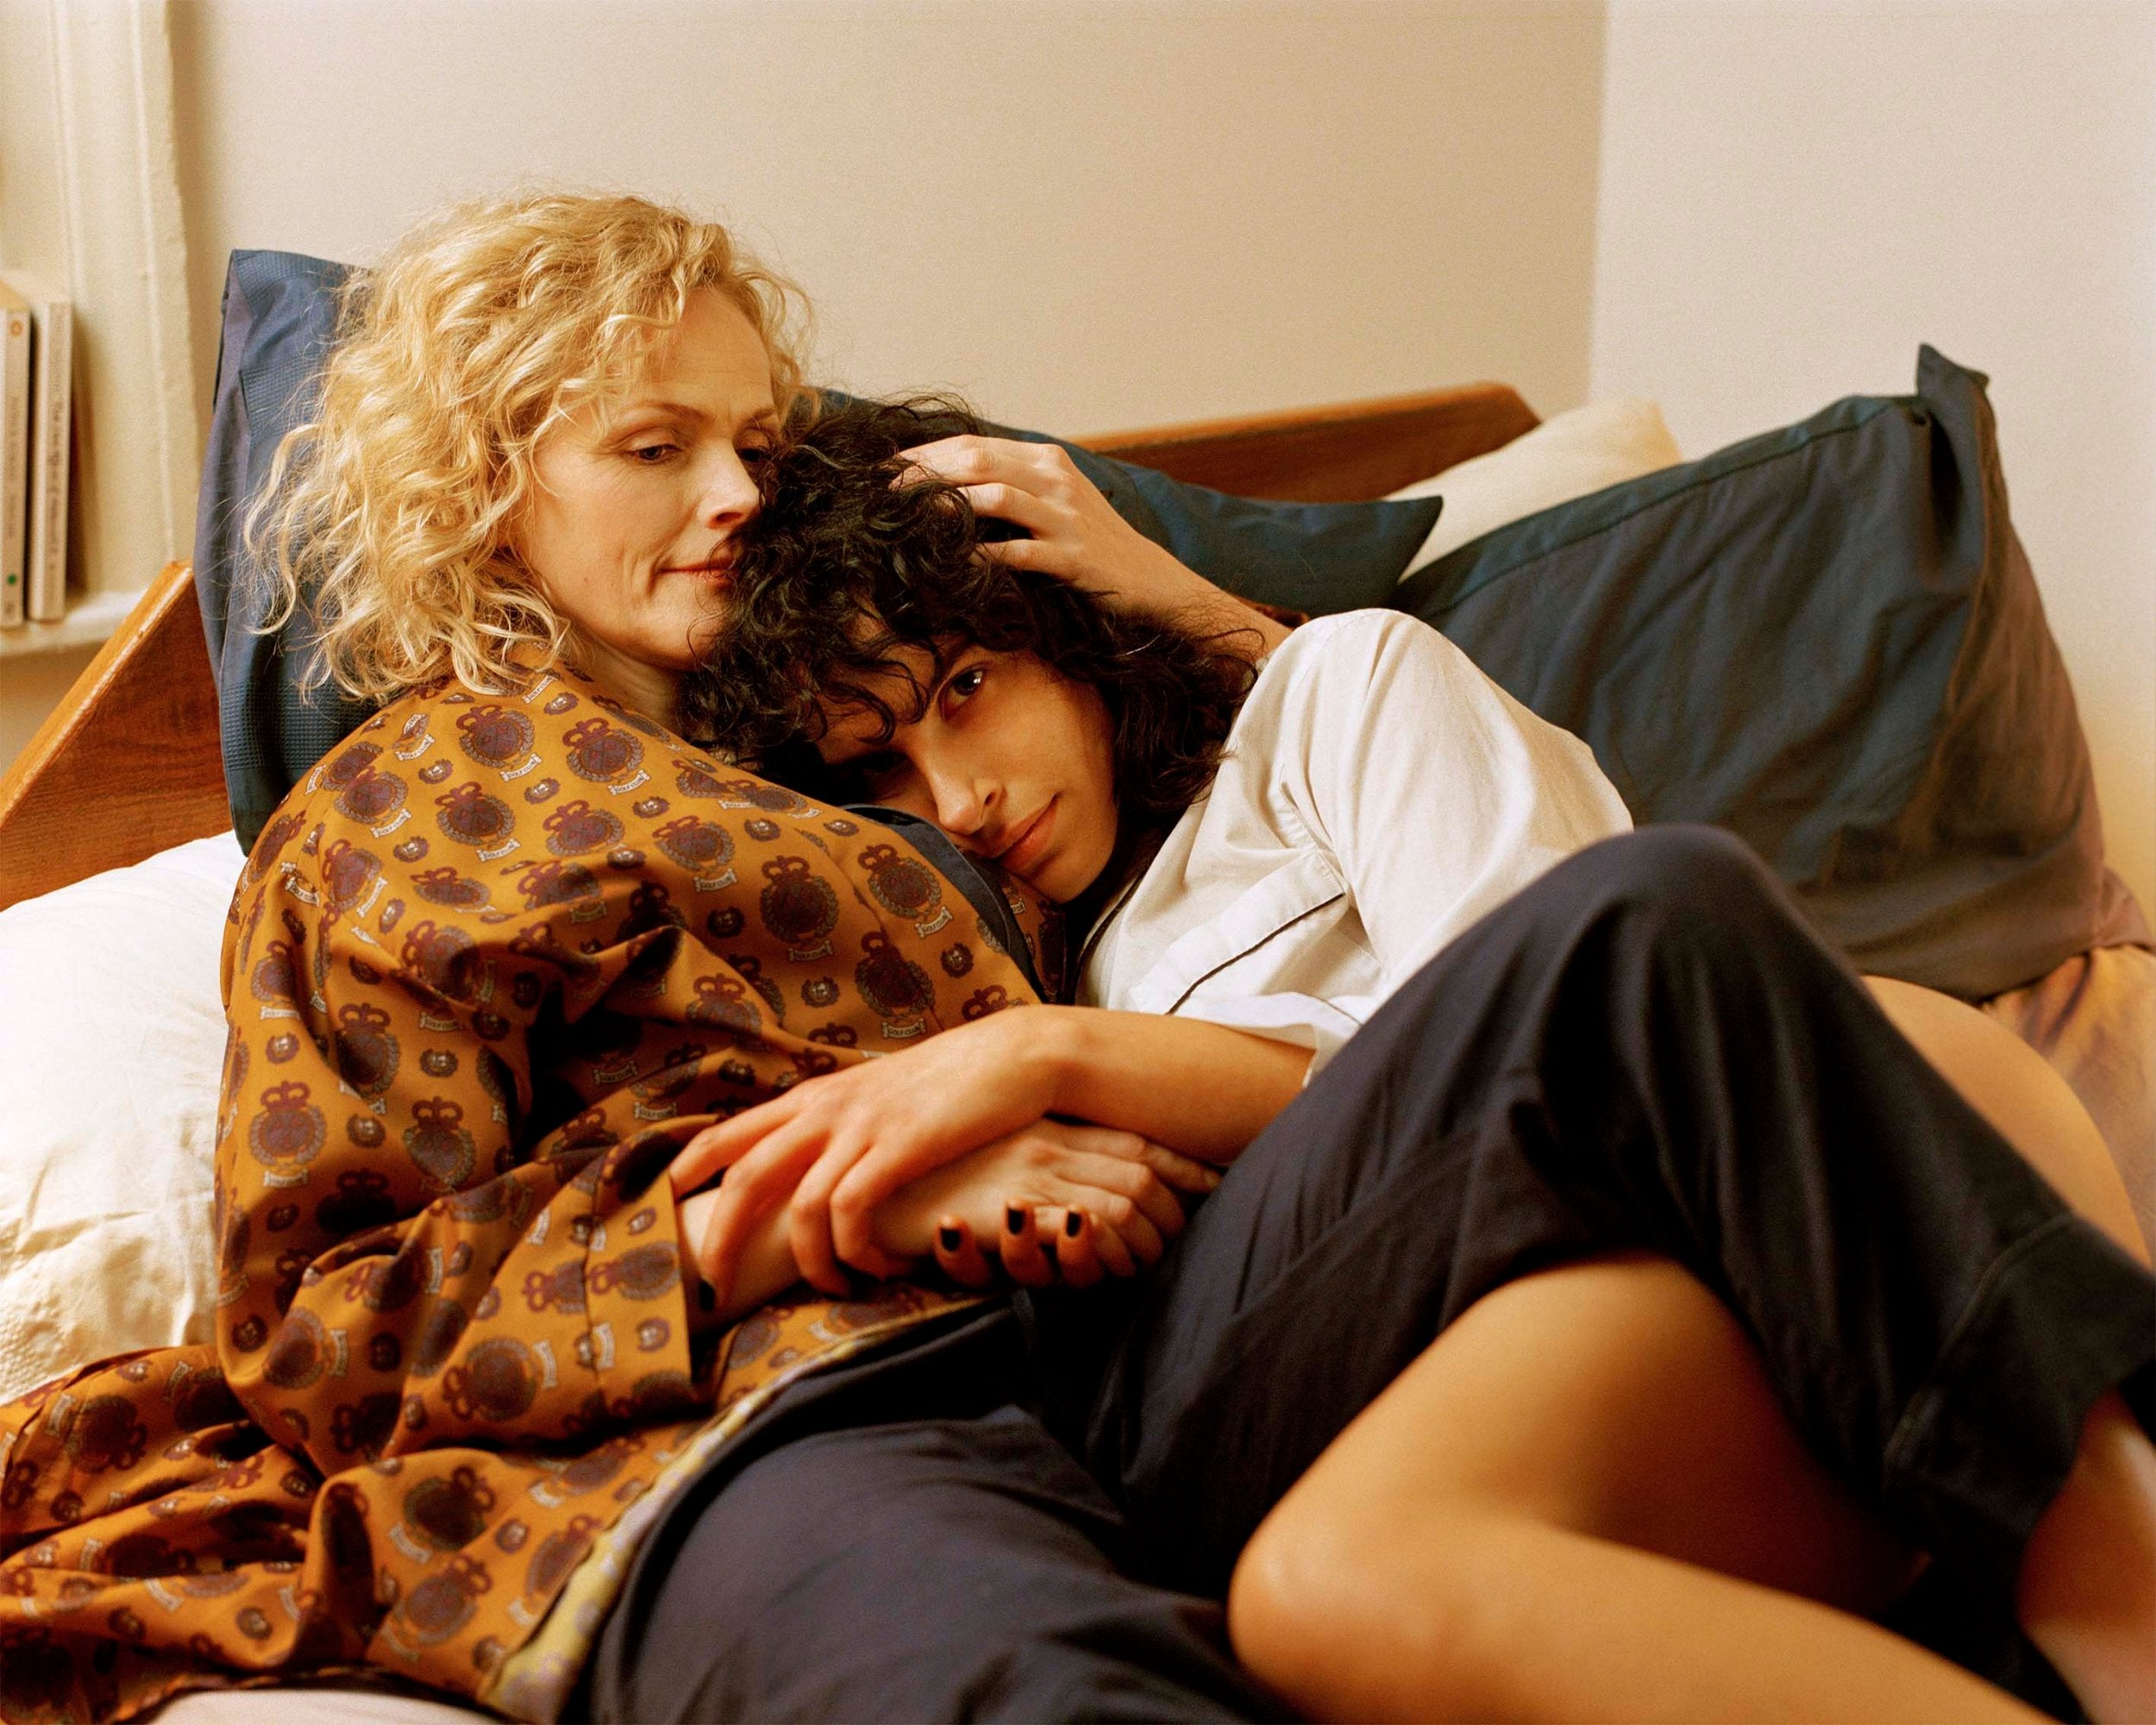 After years with the same woman, Maxine Peake’s Sadie, and after years identifying as a lesbian, Leila (Desiree Akhavan) can sense that she’s displaced in life